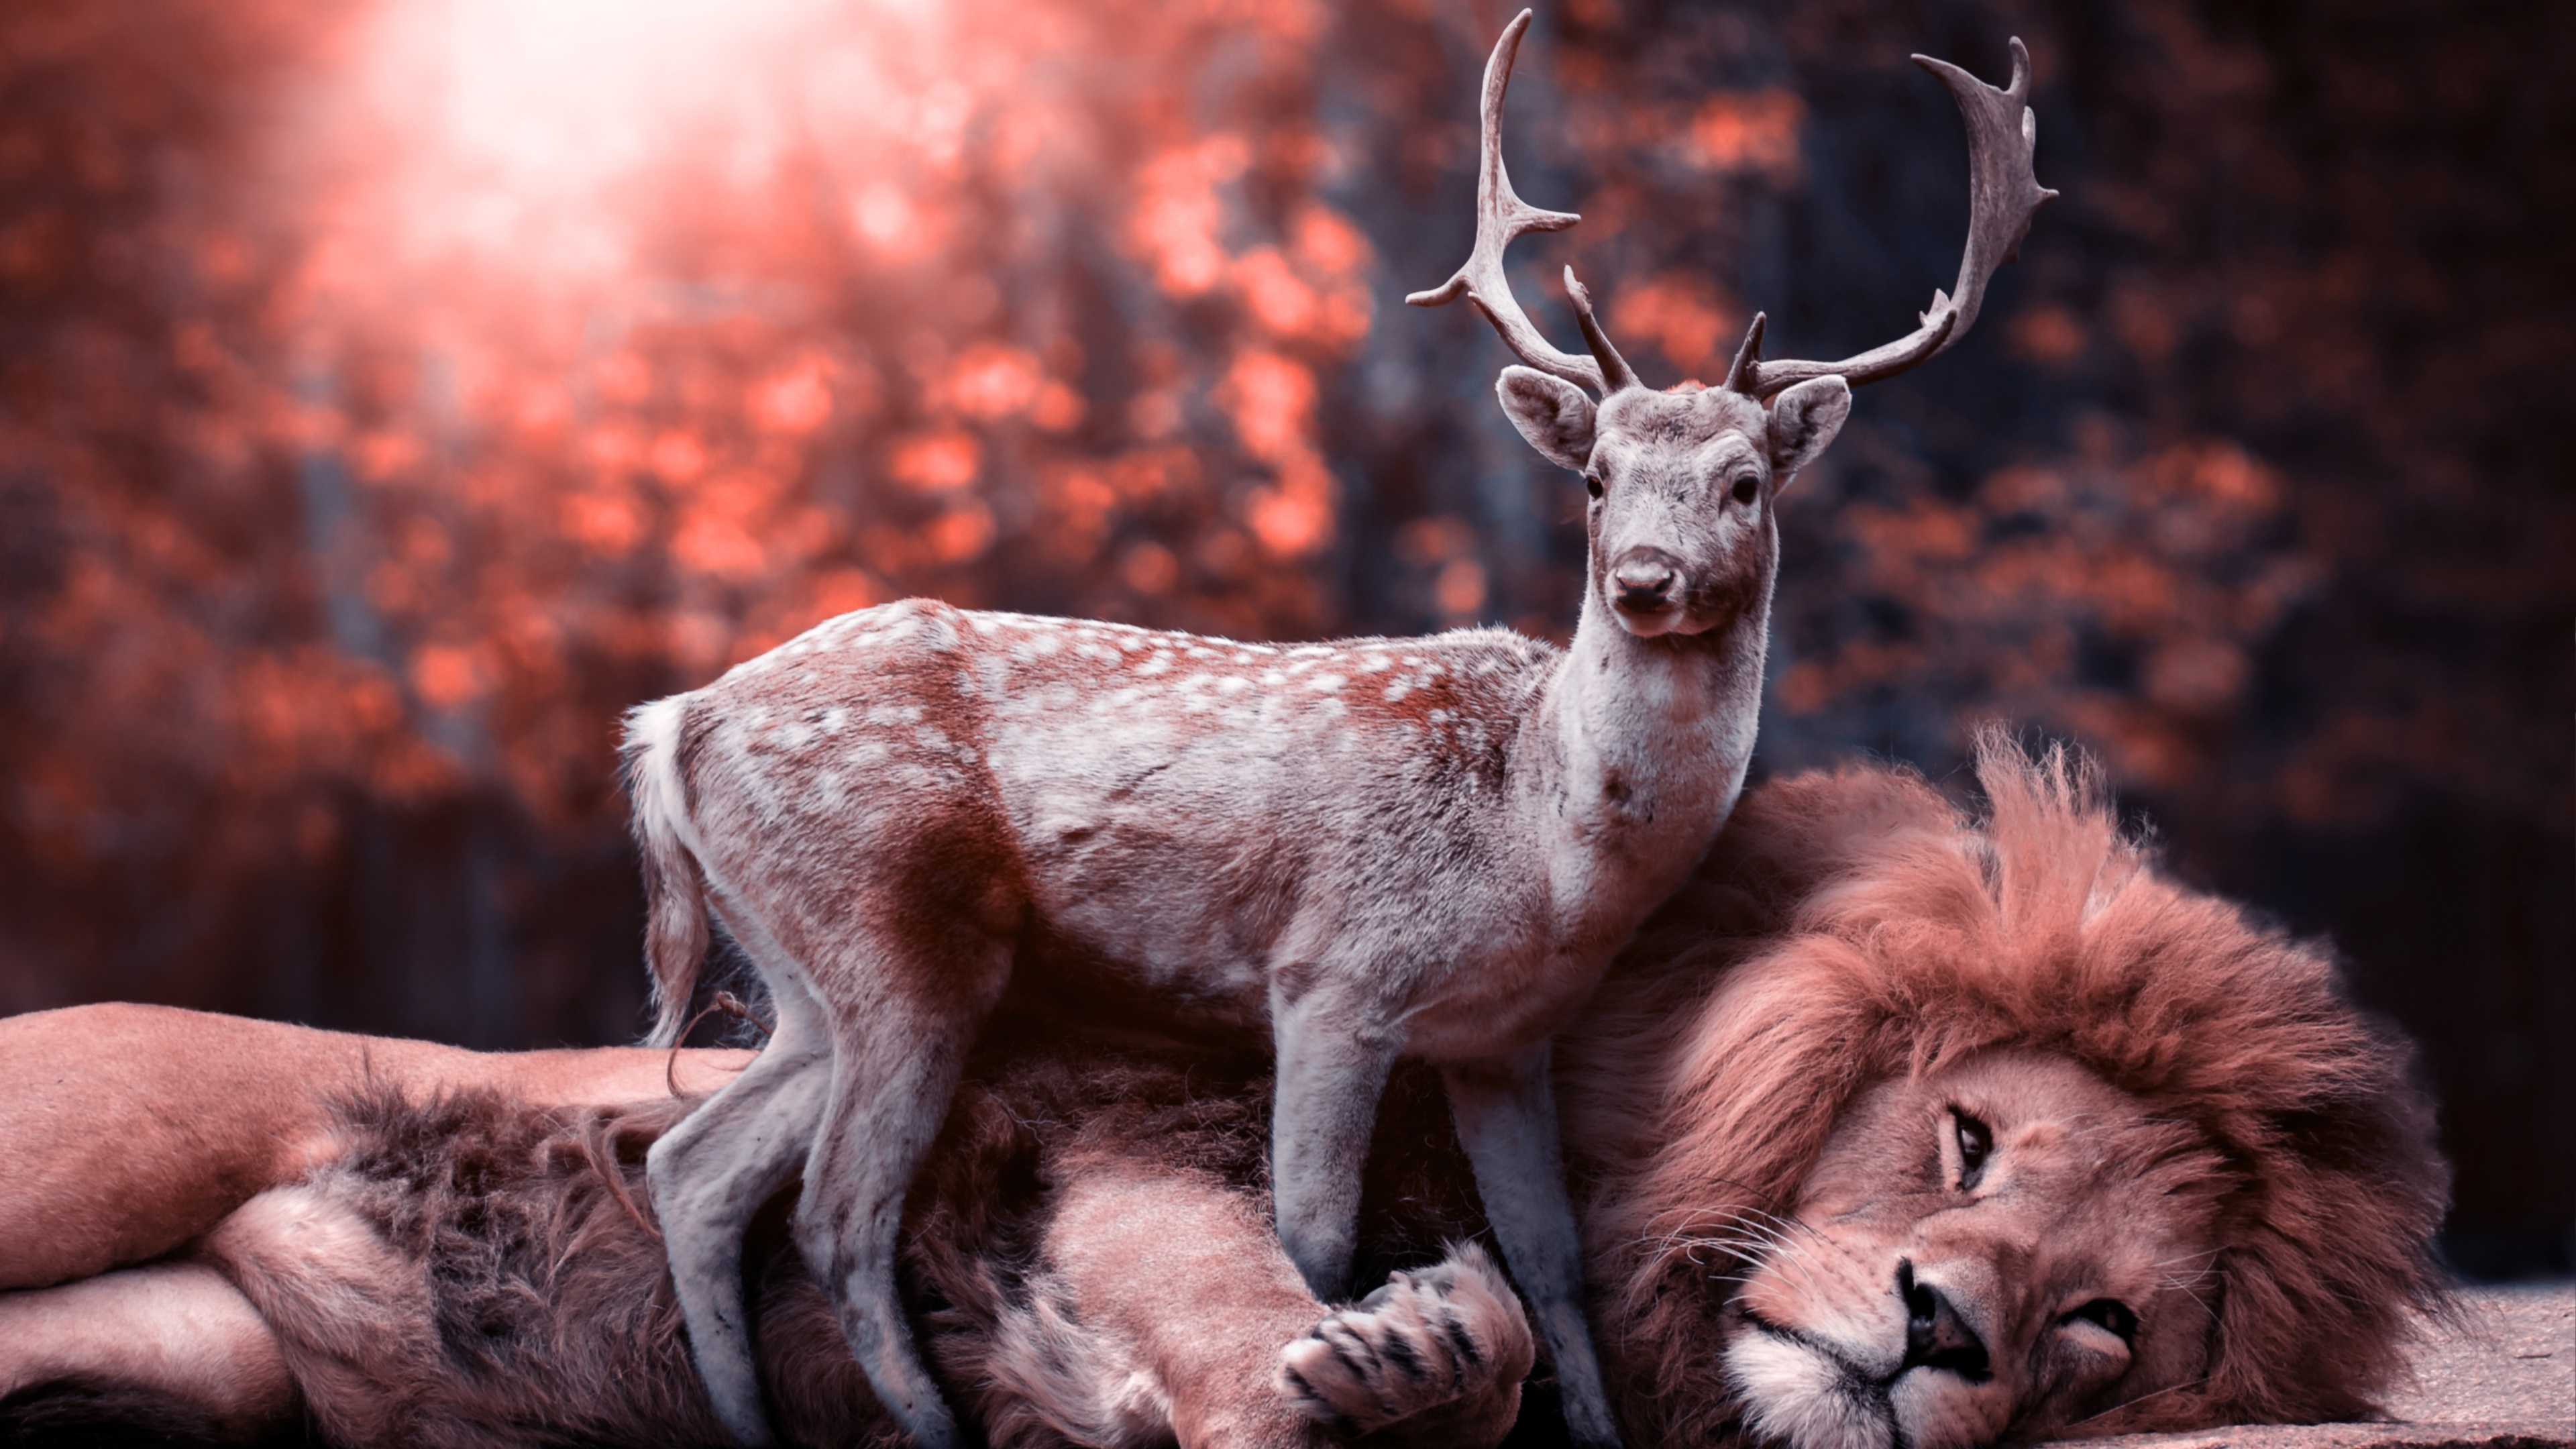 Lion Deer 4k photography wallpapers, lion wallpapers, hd ...